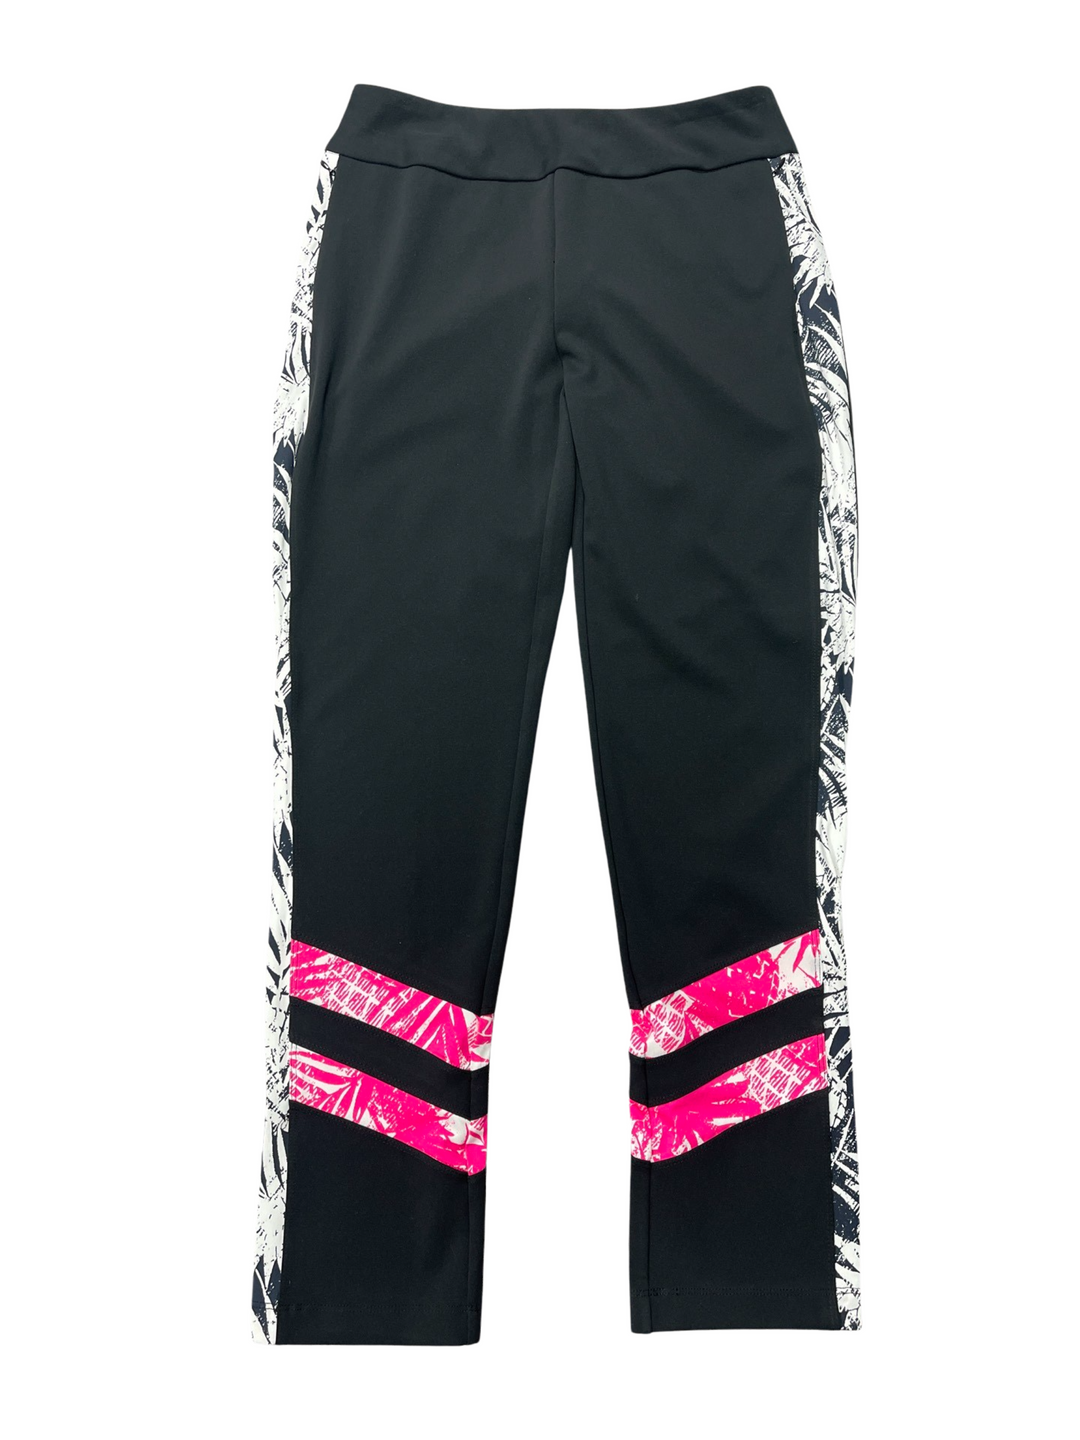 Tail Tropical Ankle Pant - Black/Hot Pink - Size 6 - Skorzie